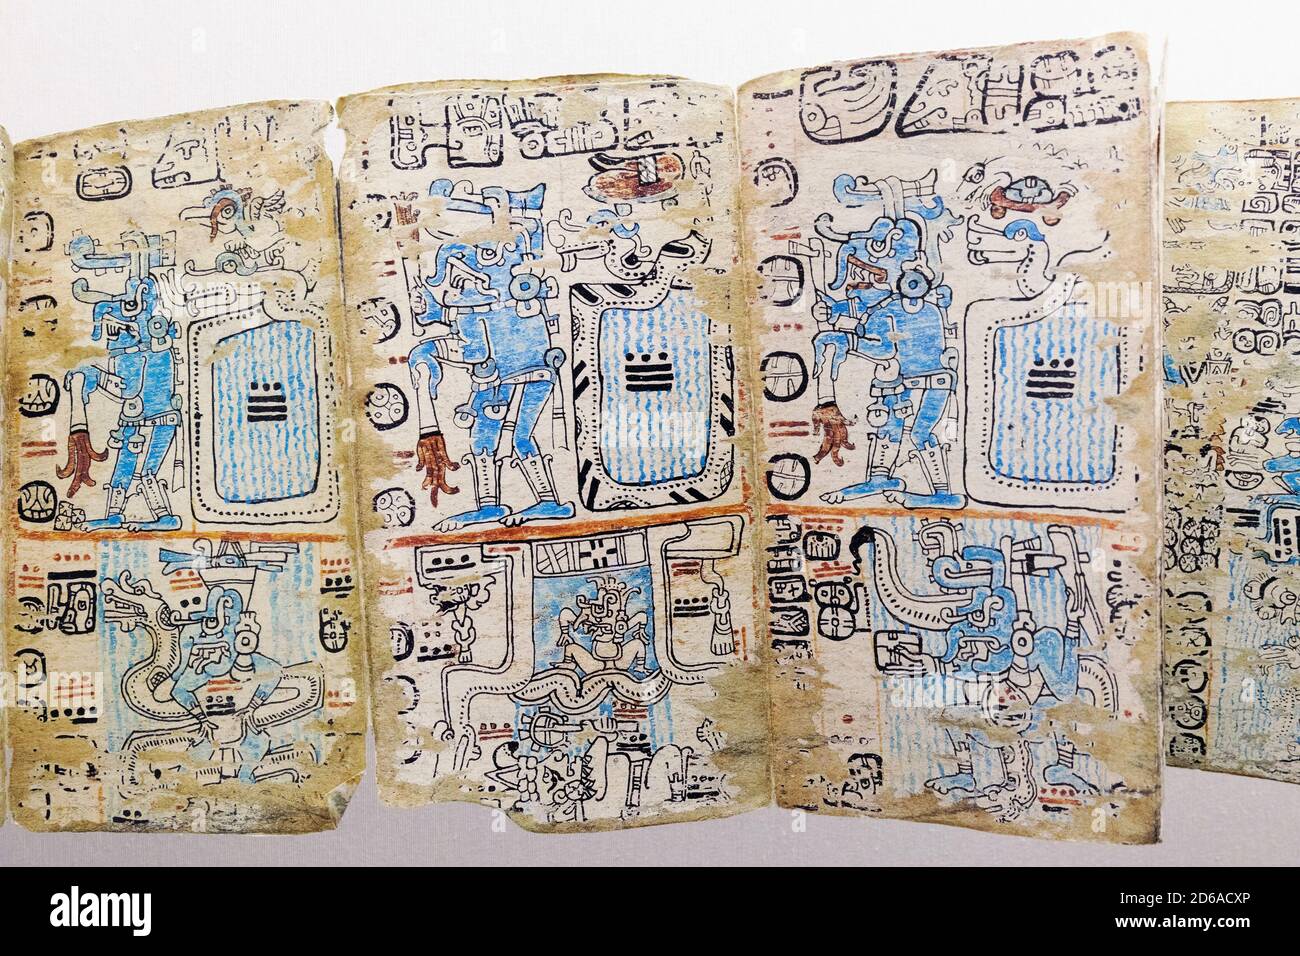 Detail of a facsimile of the 14th century Mayan Codex Cortesianus, also known as The Madrid Codex or the Troano Codex on display at the museum of El M Stock Photo